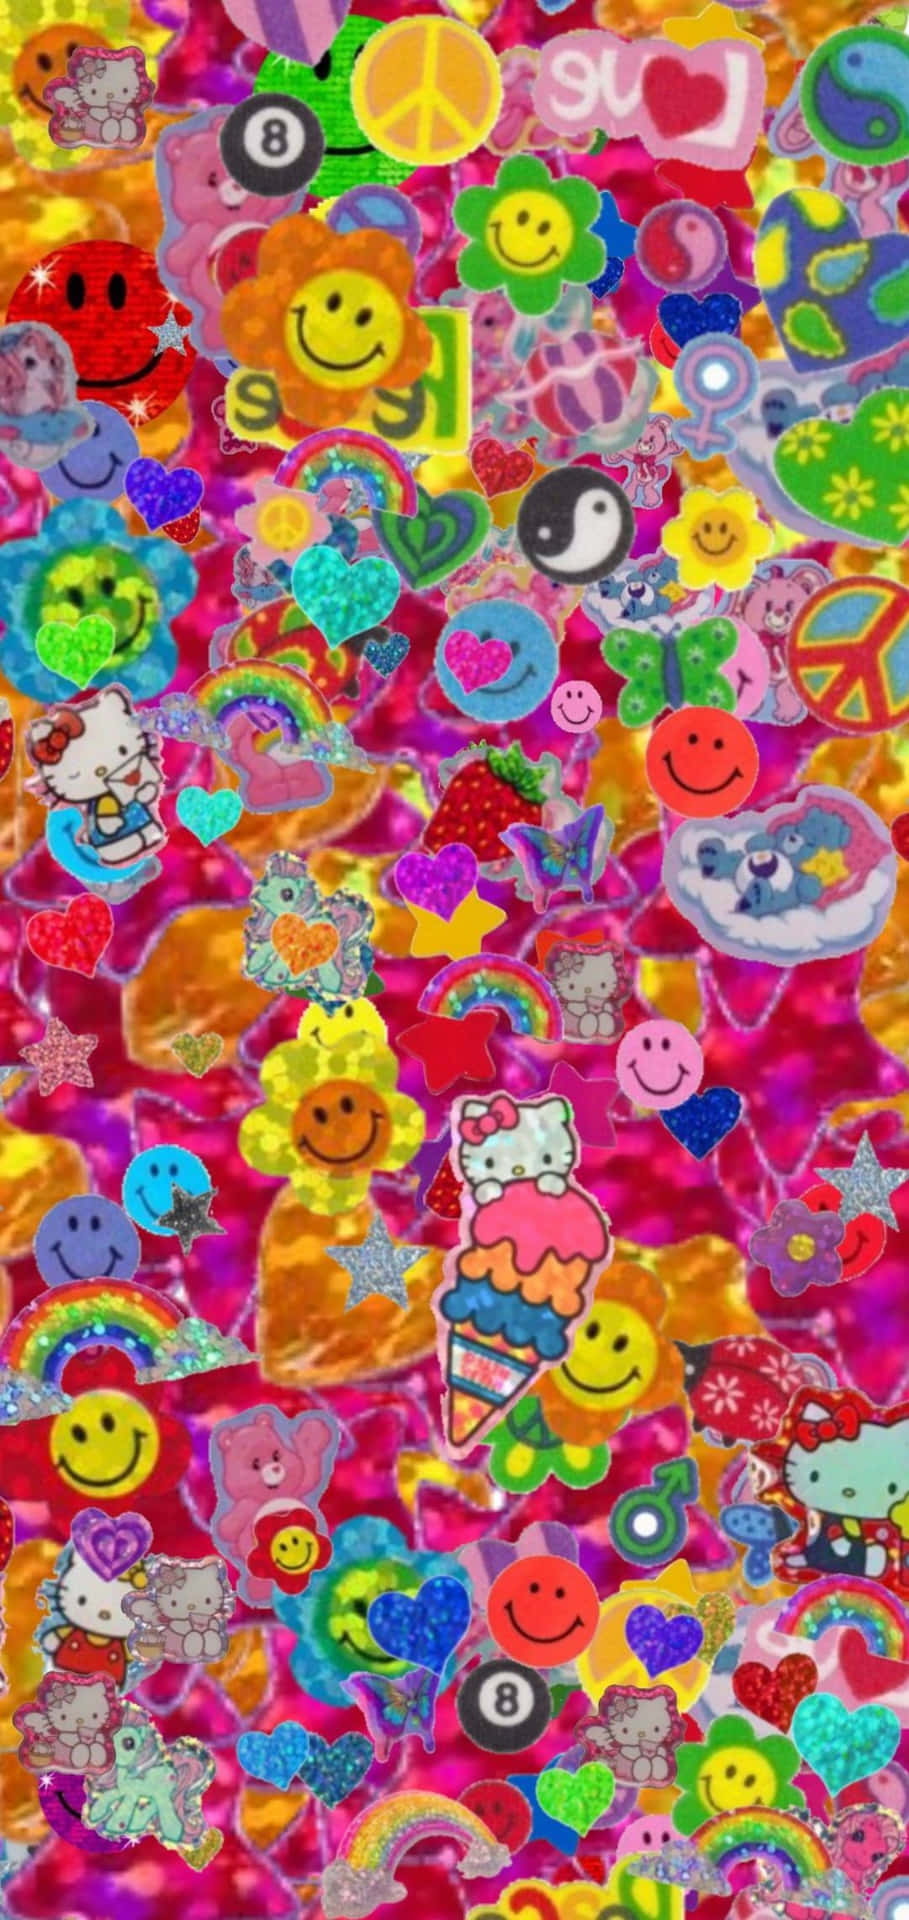 Colorful Sticker Collage Y2 K Aesthetic Wallpaper